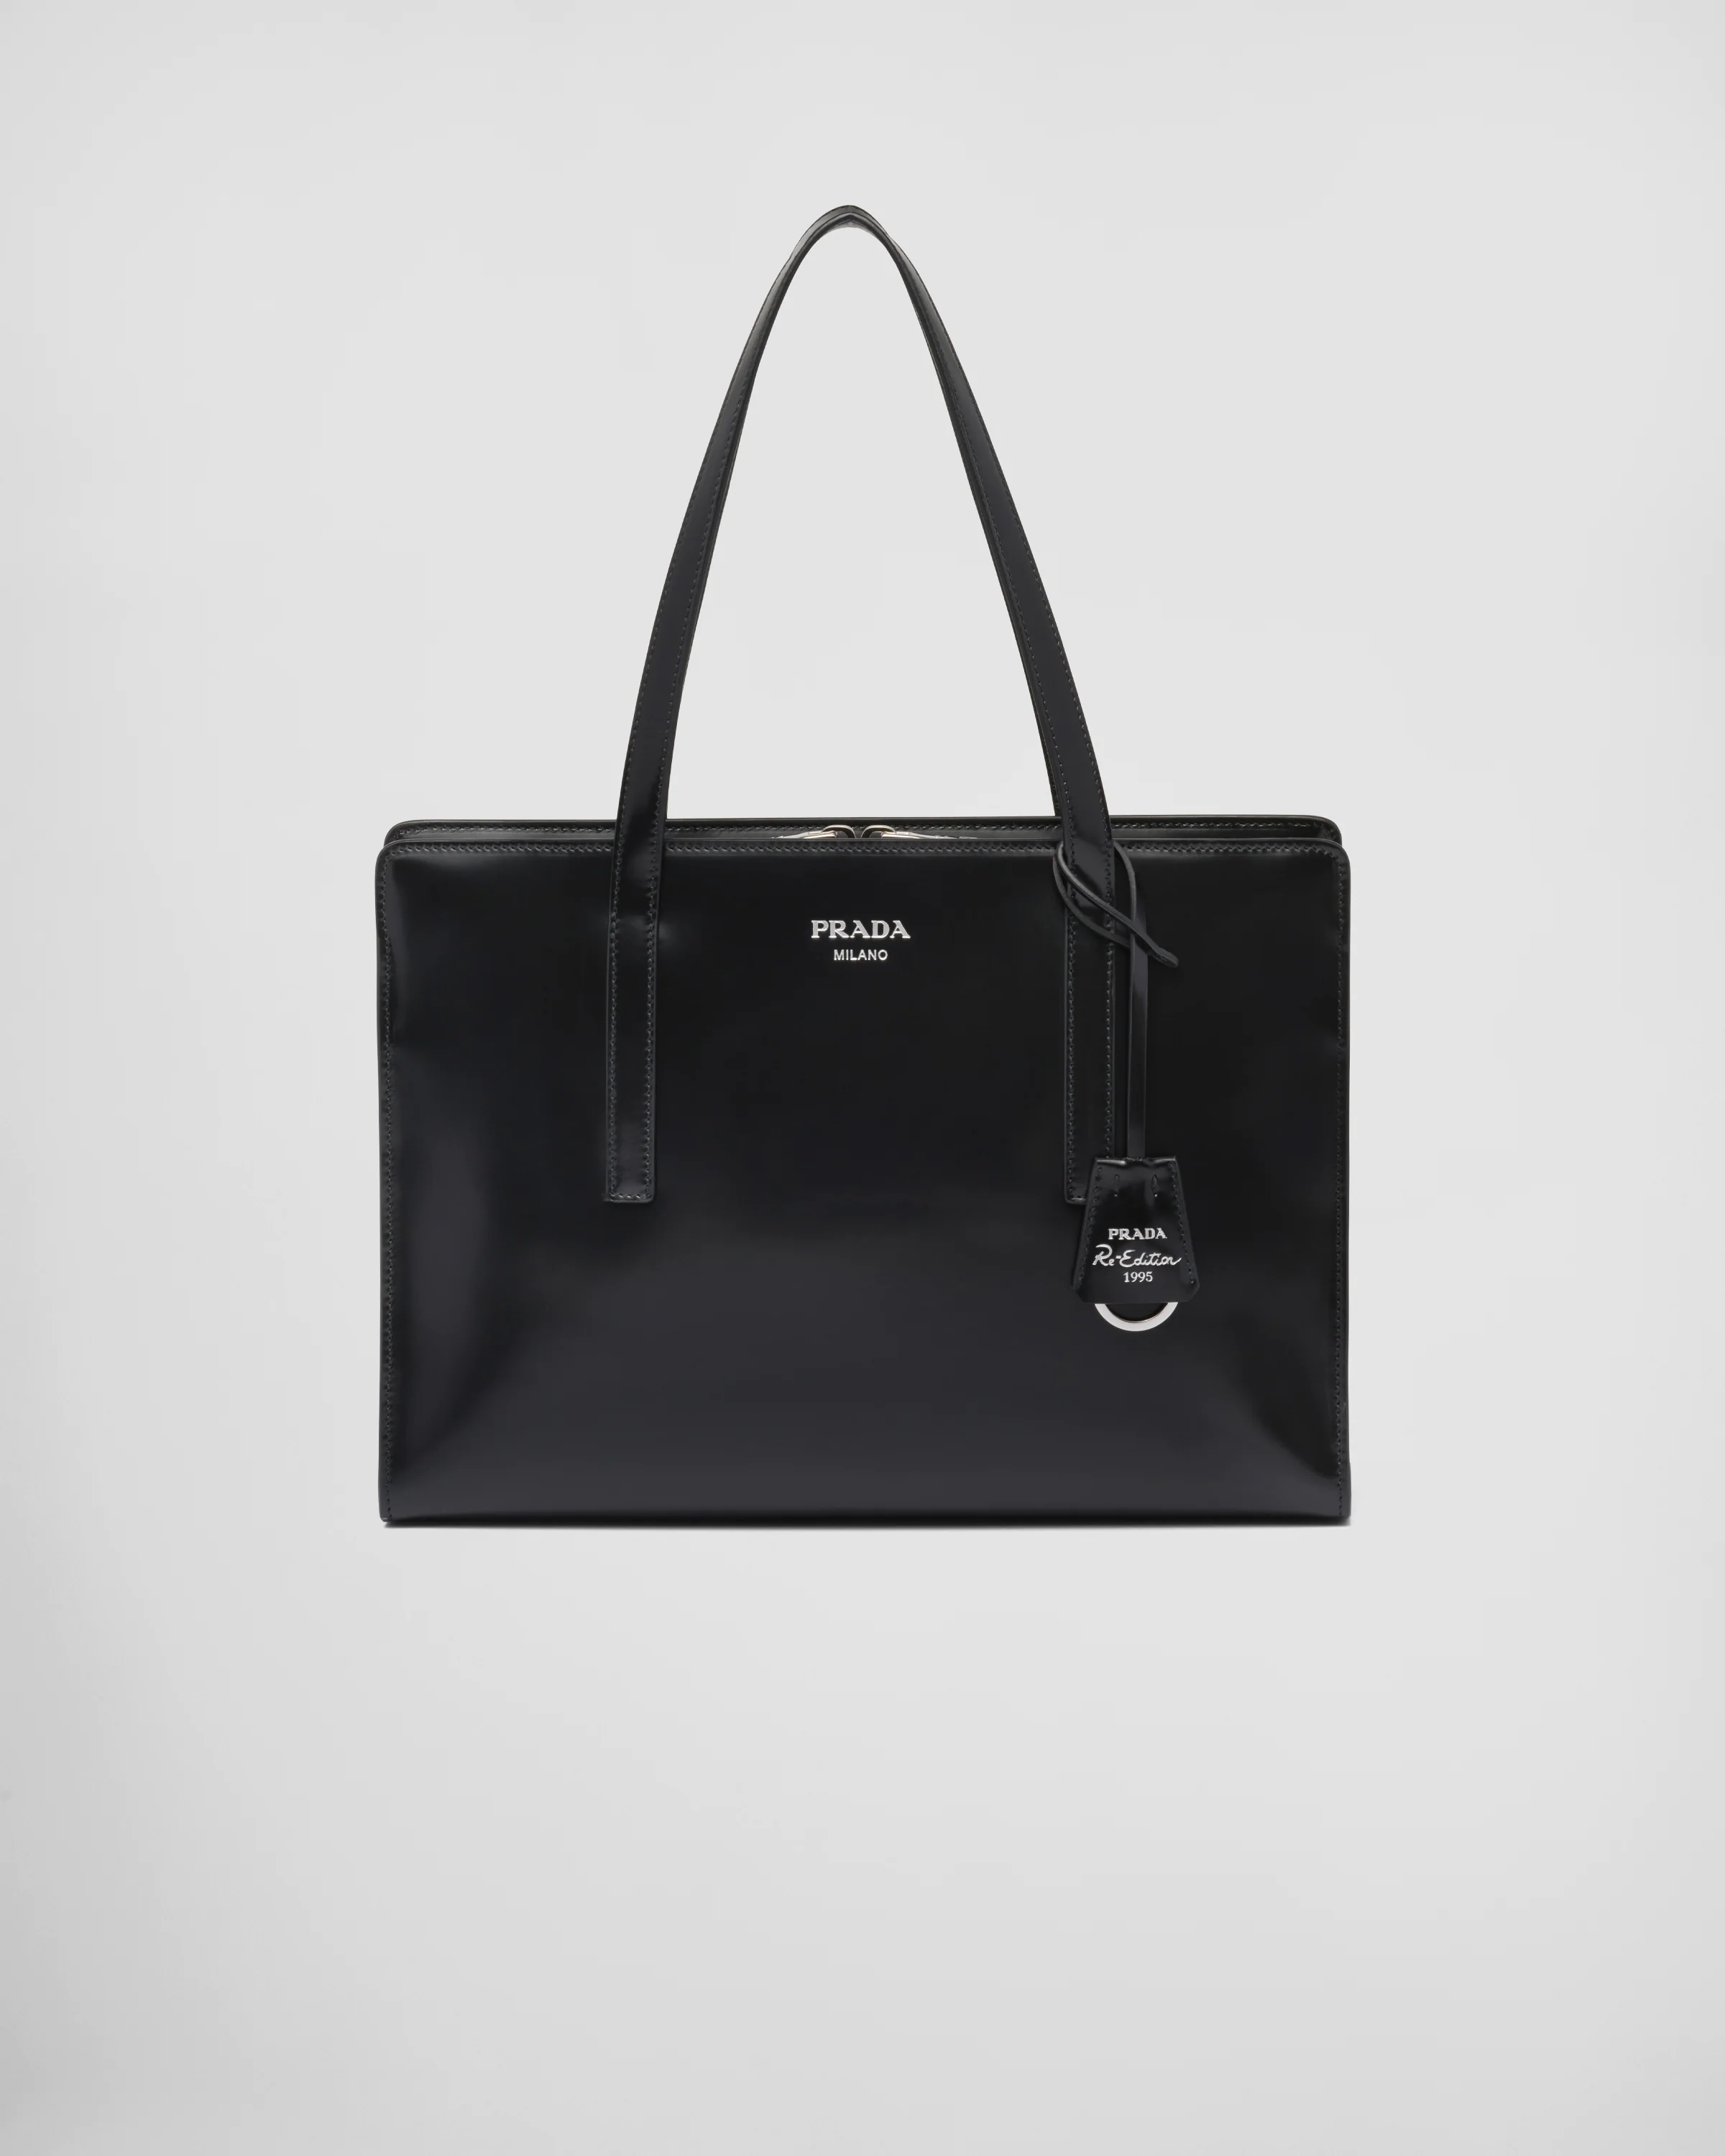 LOEWE launches new Goya statement bags in smooth silk calfskin and vibrant  colours